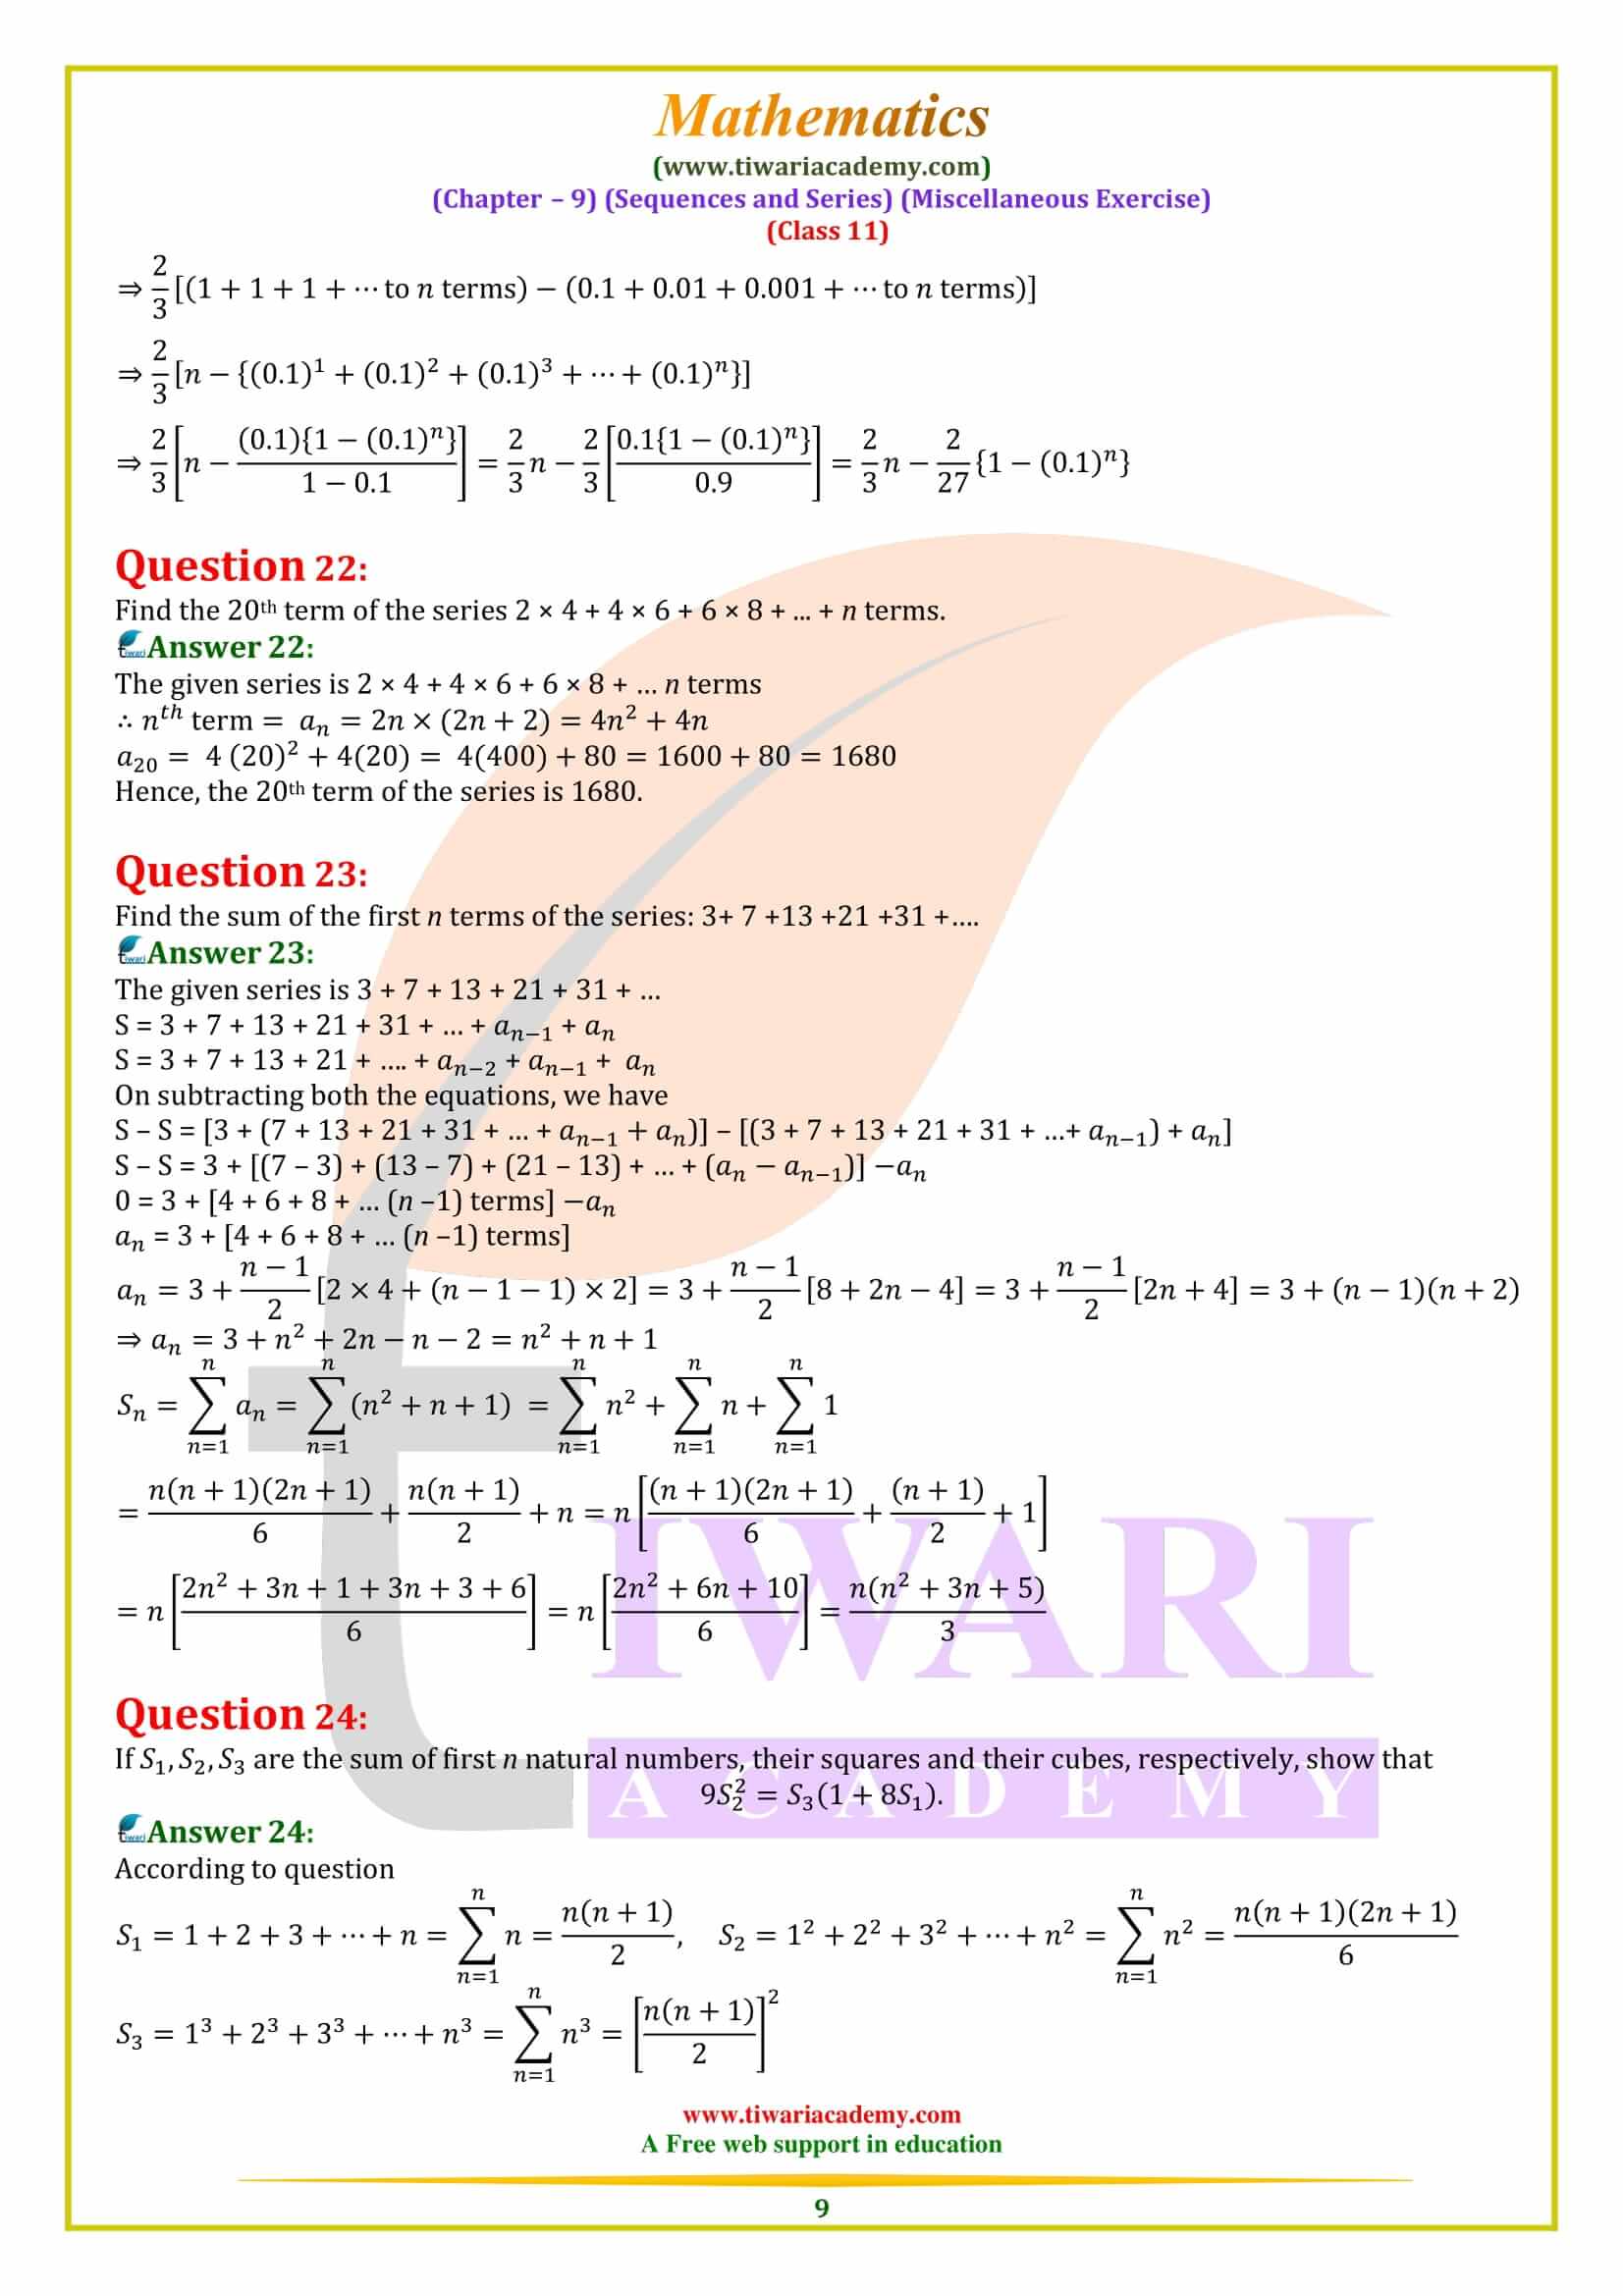 NCERT Solutions for Class 11 Maths Chapter 9 Miscellaneous Exercise answers